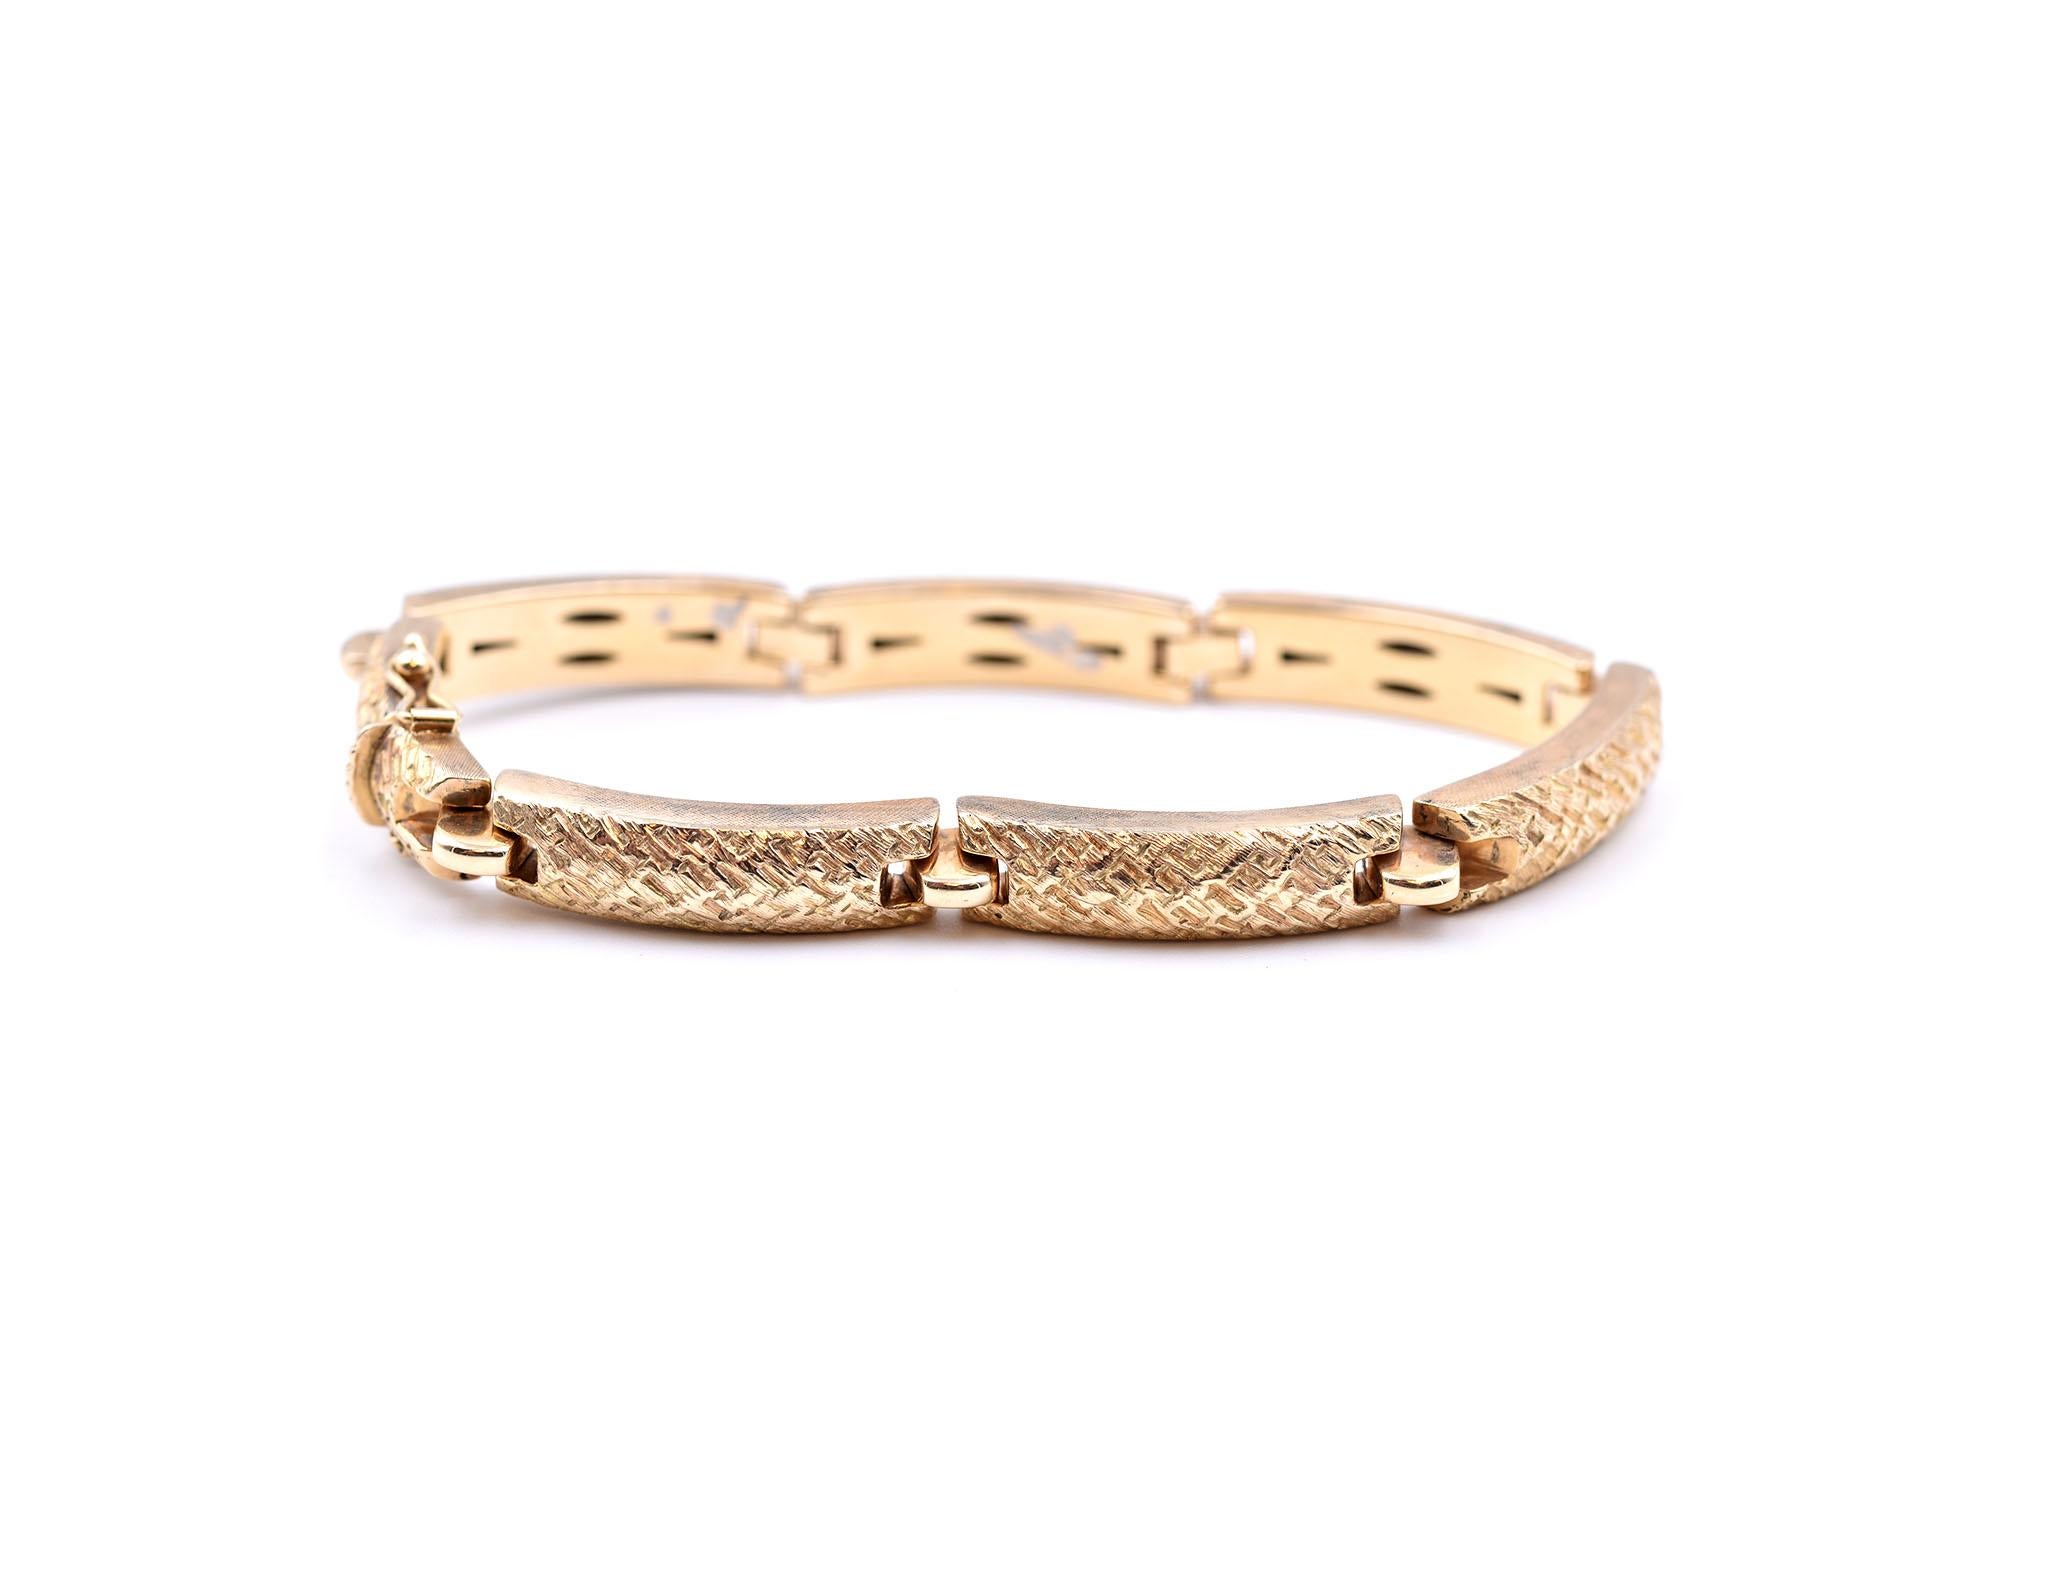 Designer: custom design
Material: 14k yellow gold
Dimensions: bracelet is 7 1/2-inch long x 3/8-inch wide
Weight: 12.3 grams
